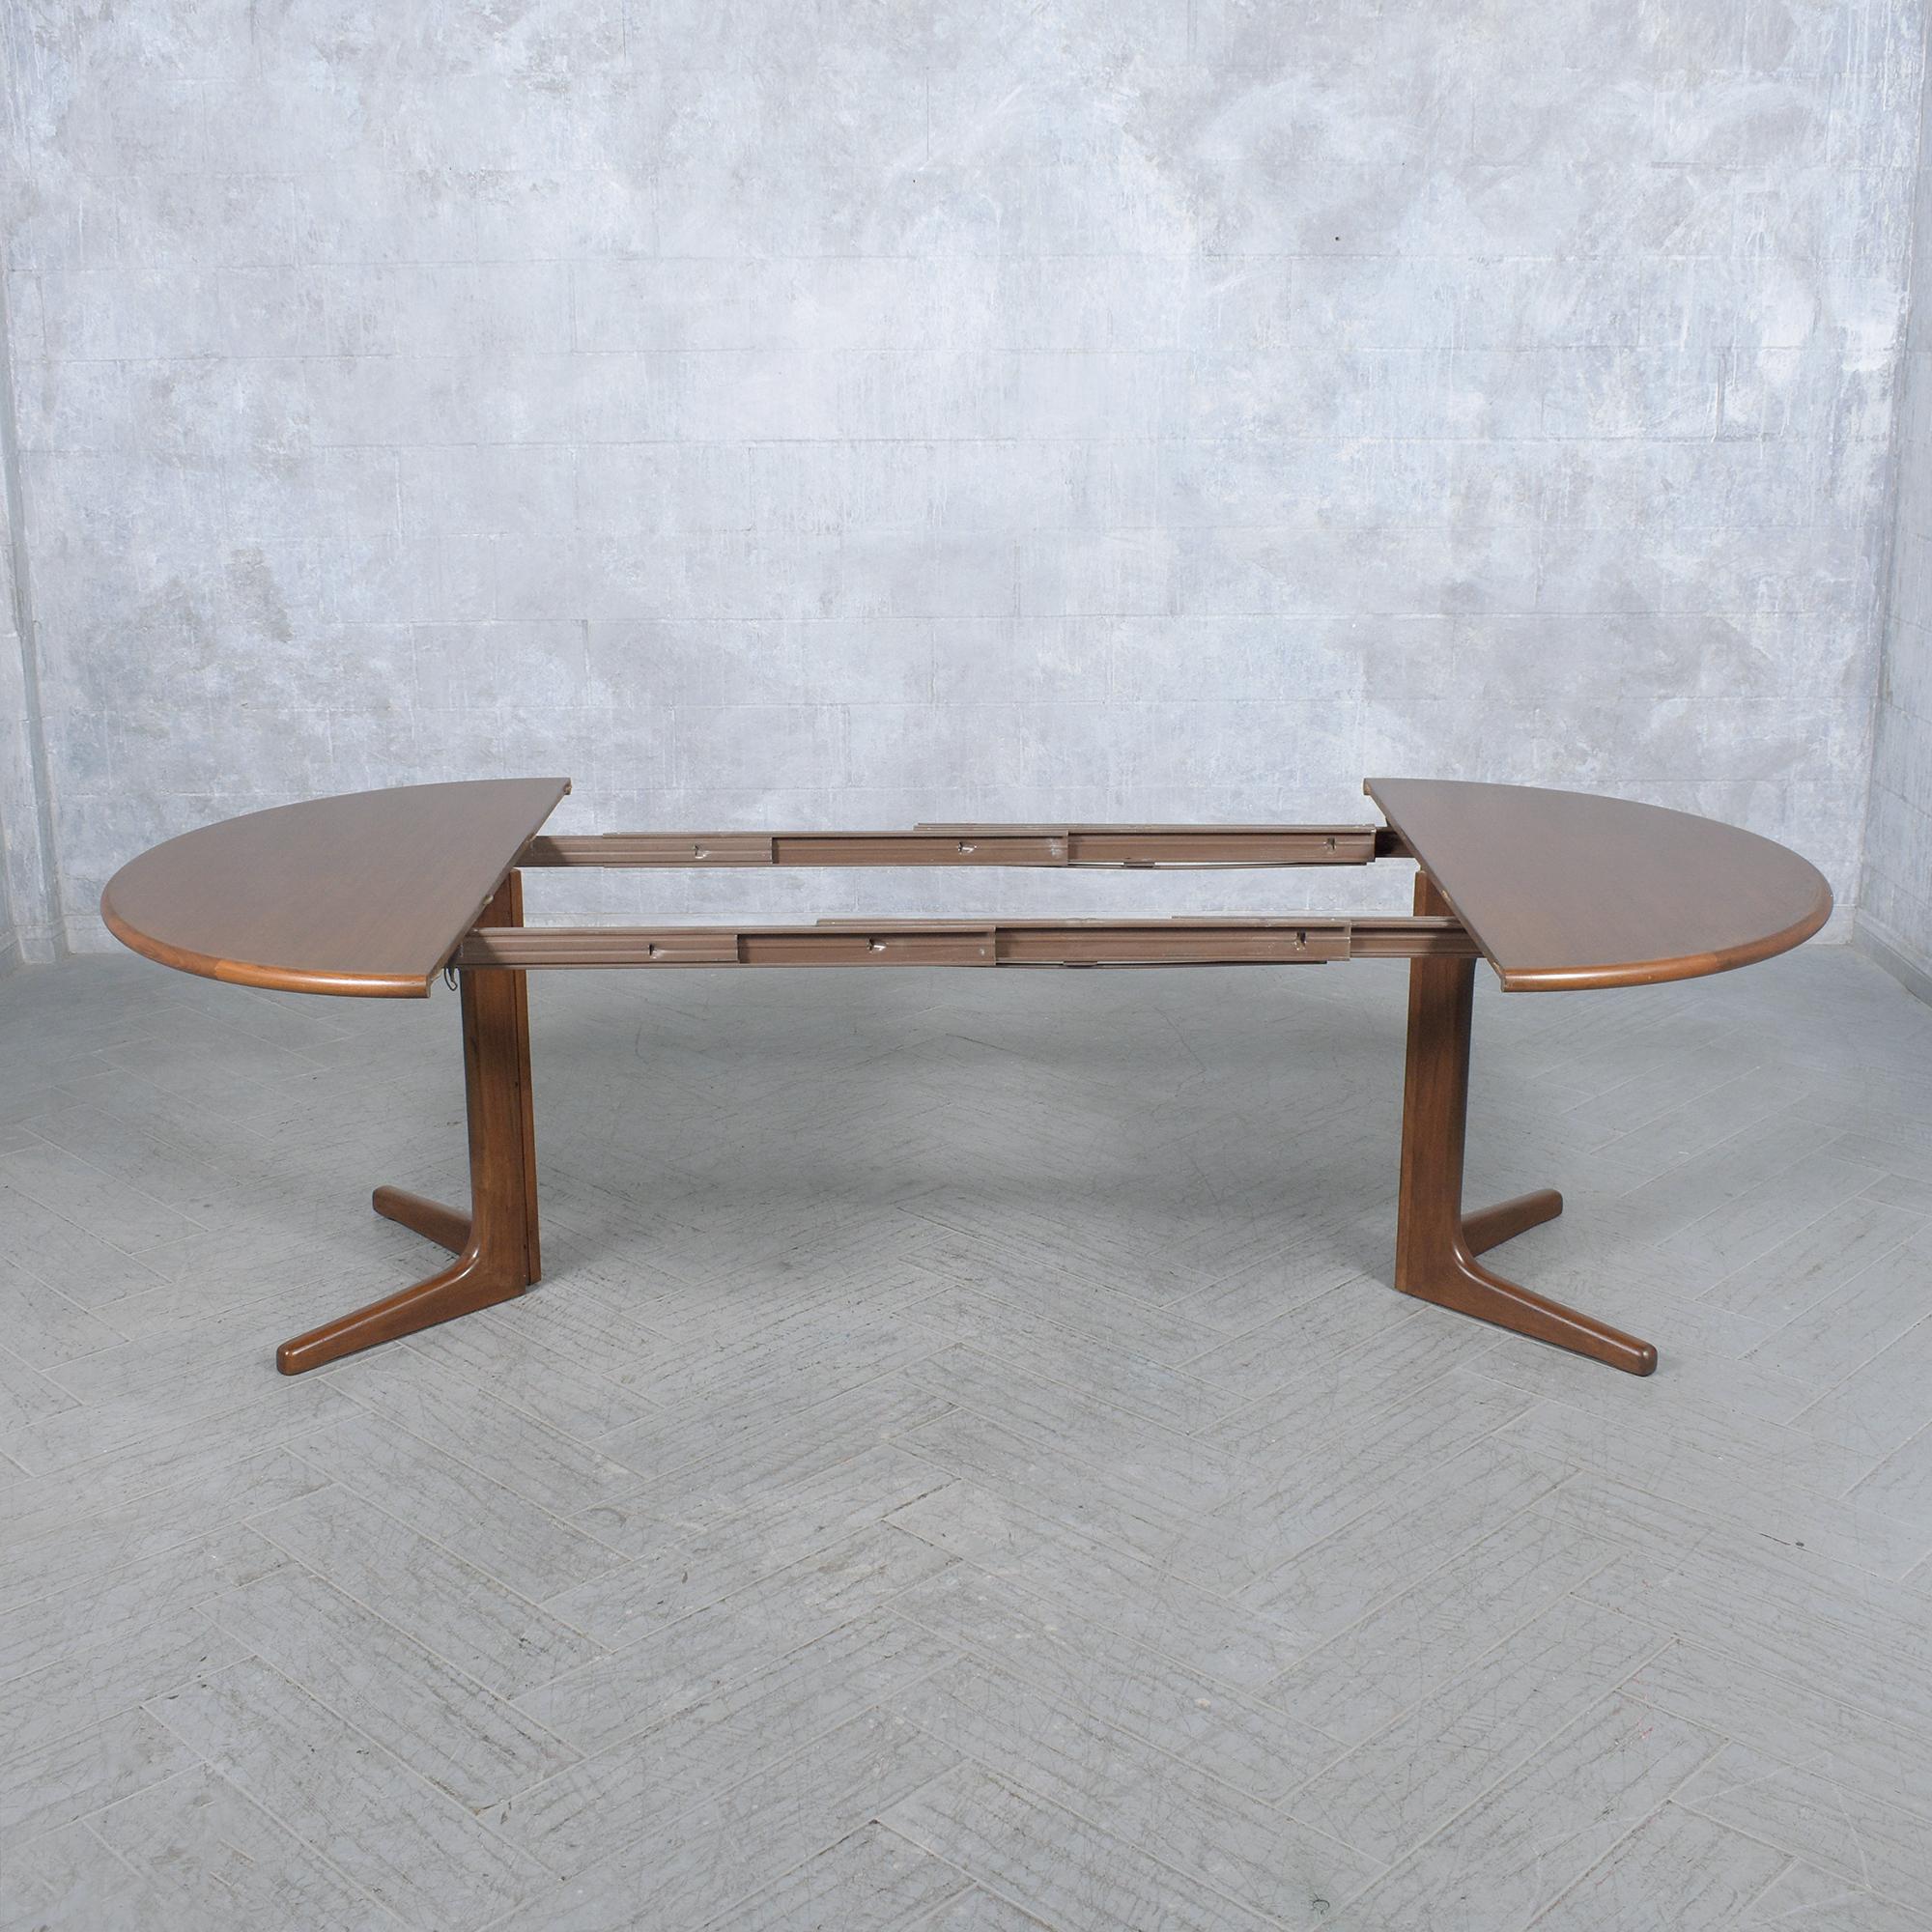 Stained Vintage Danish Extendable Teak Dining Table  Seats 10 For Sale